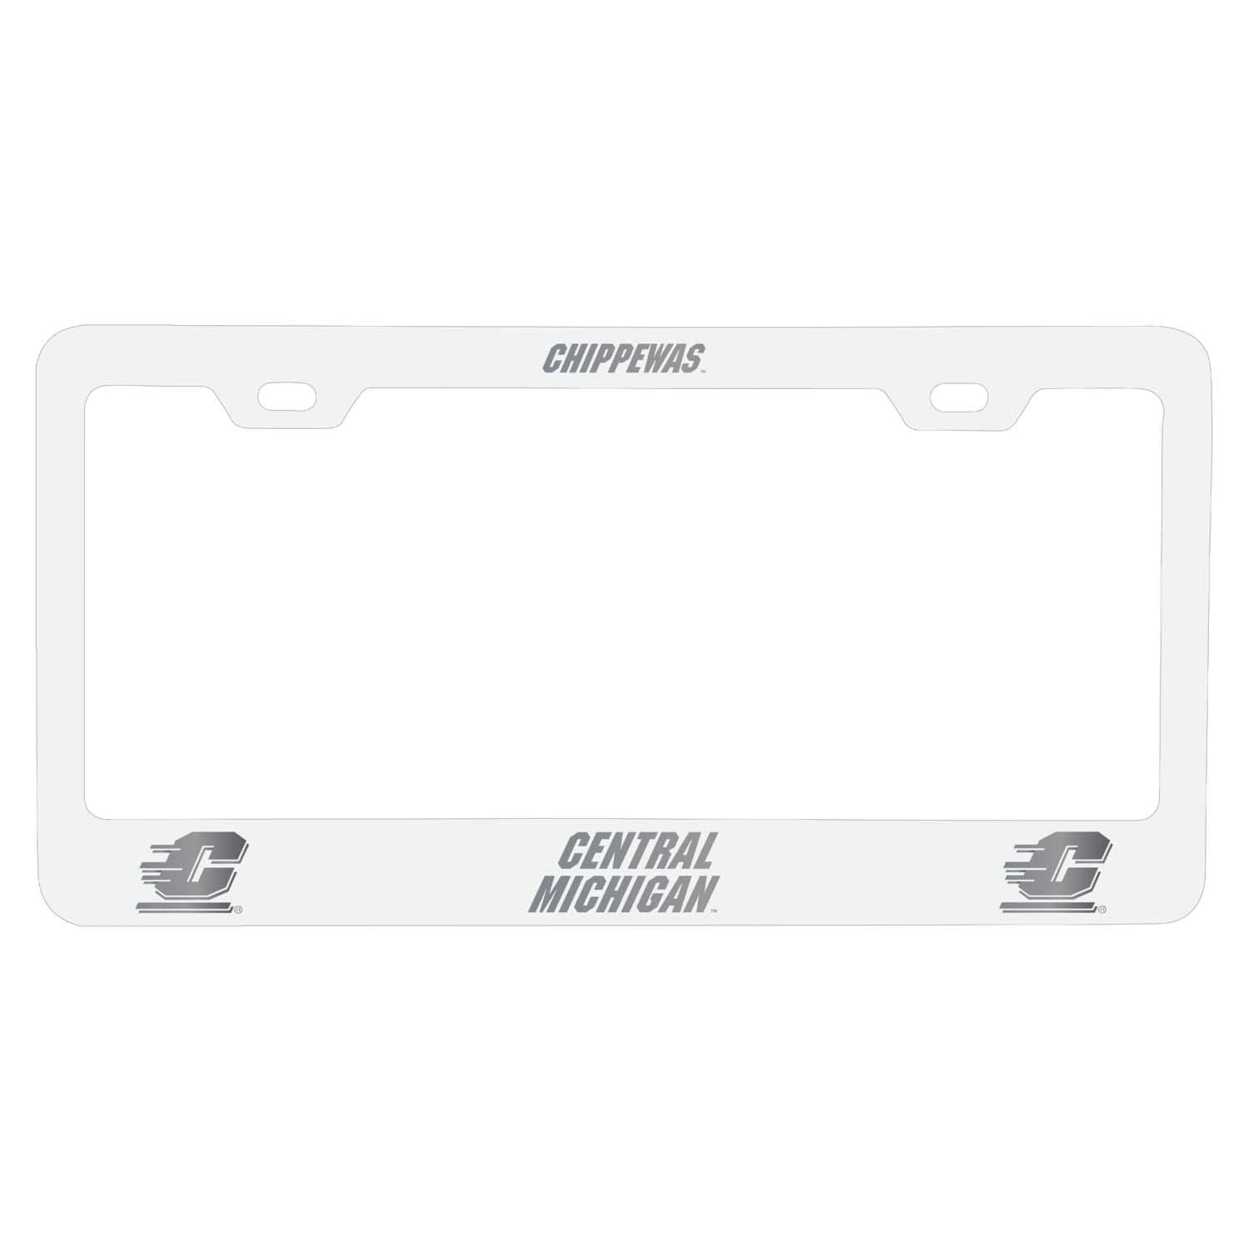 Central Michigan University Etched Metal License Plate Frame Choose Your Color